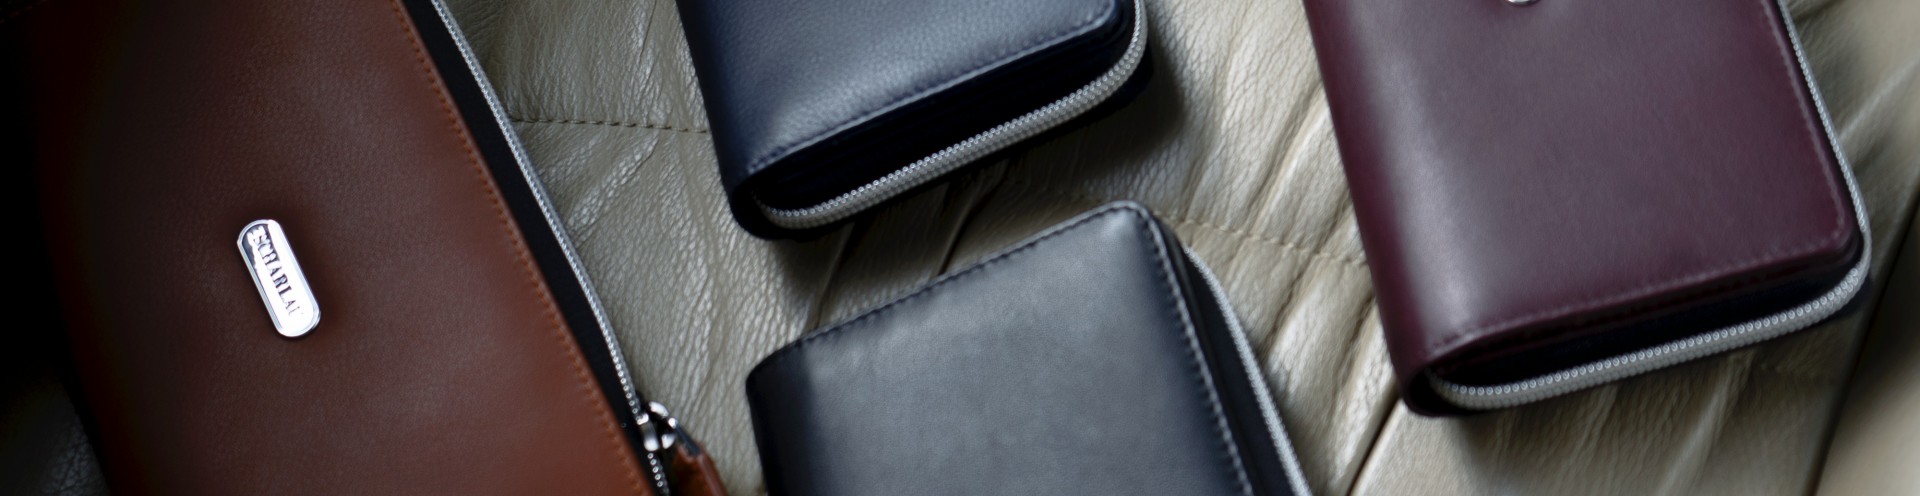 Elegant Wallets and Card Holders for Men and Women